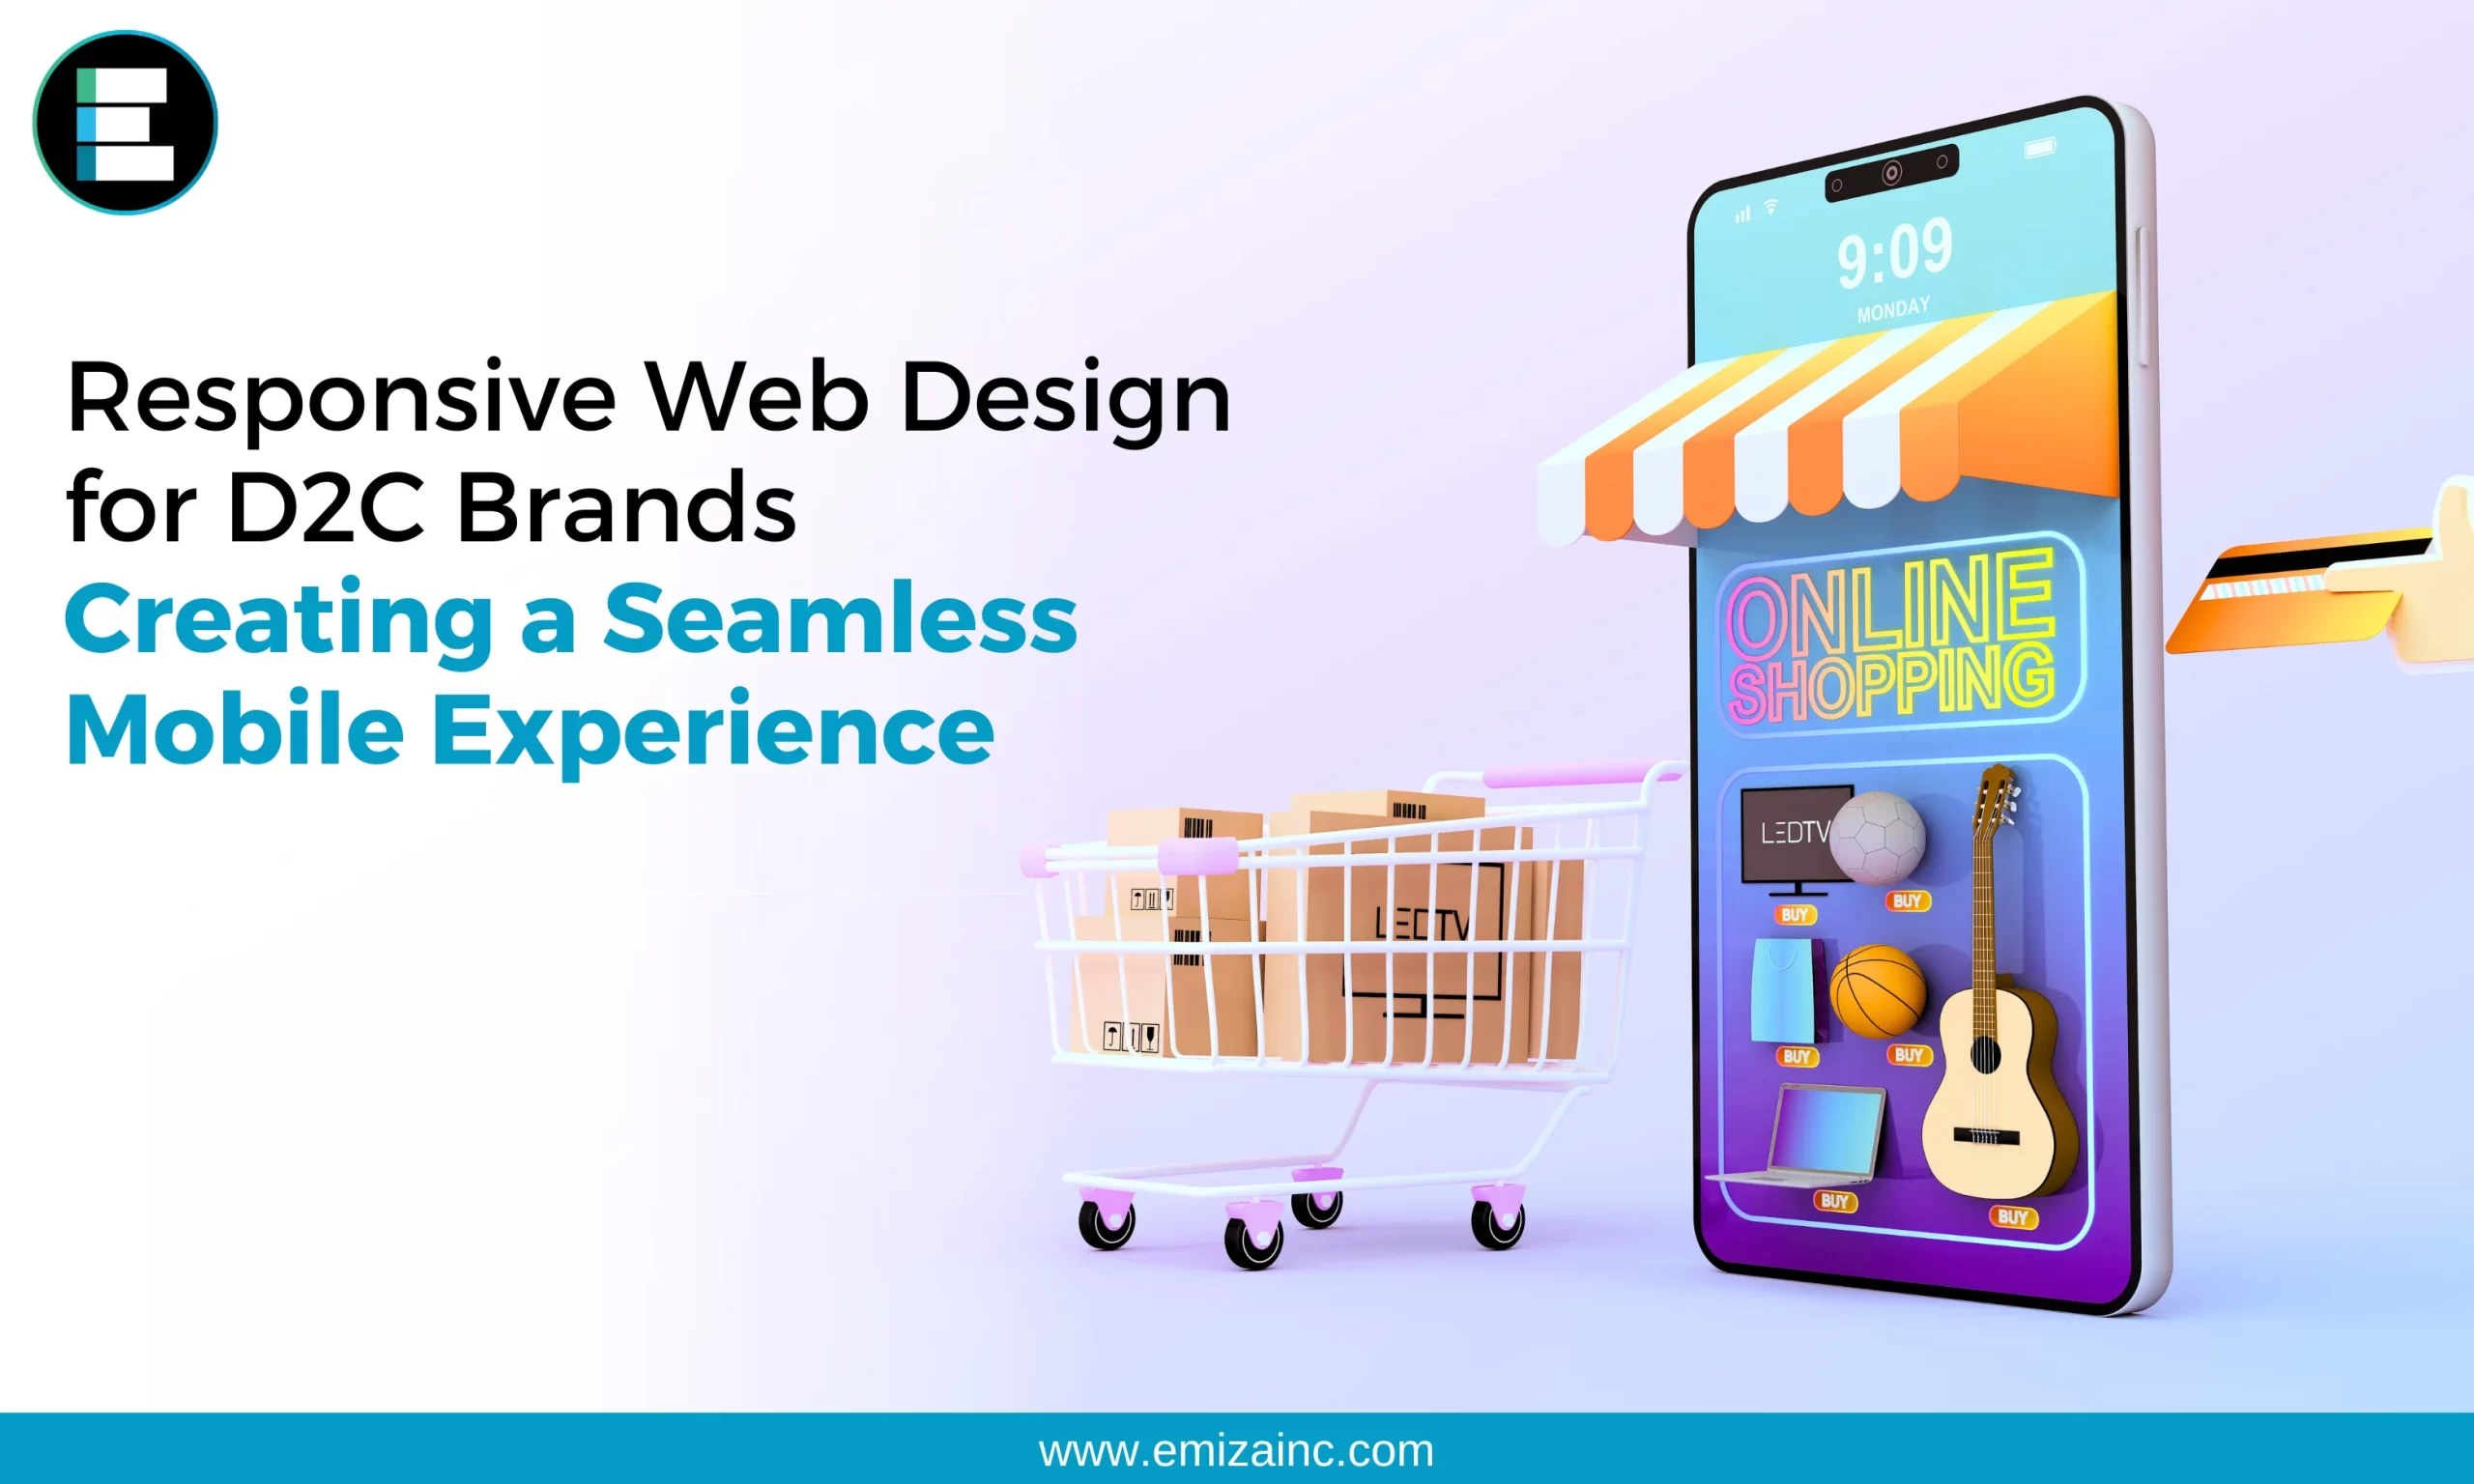 Responsive Web Design for D2C Brands Creating a Seamless Mobile Experience